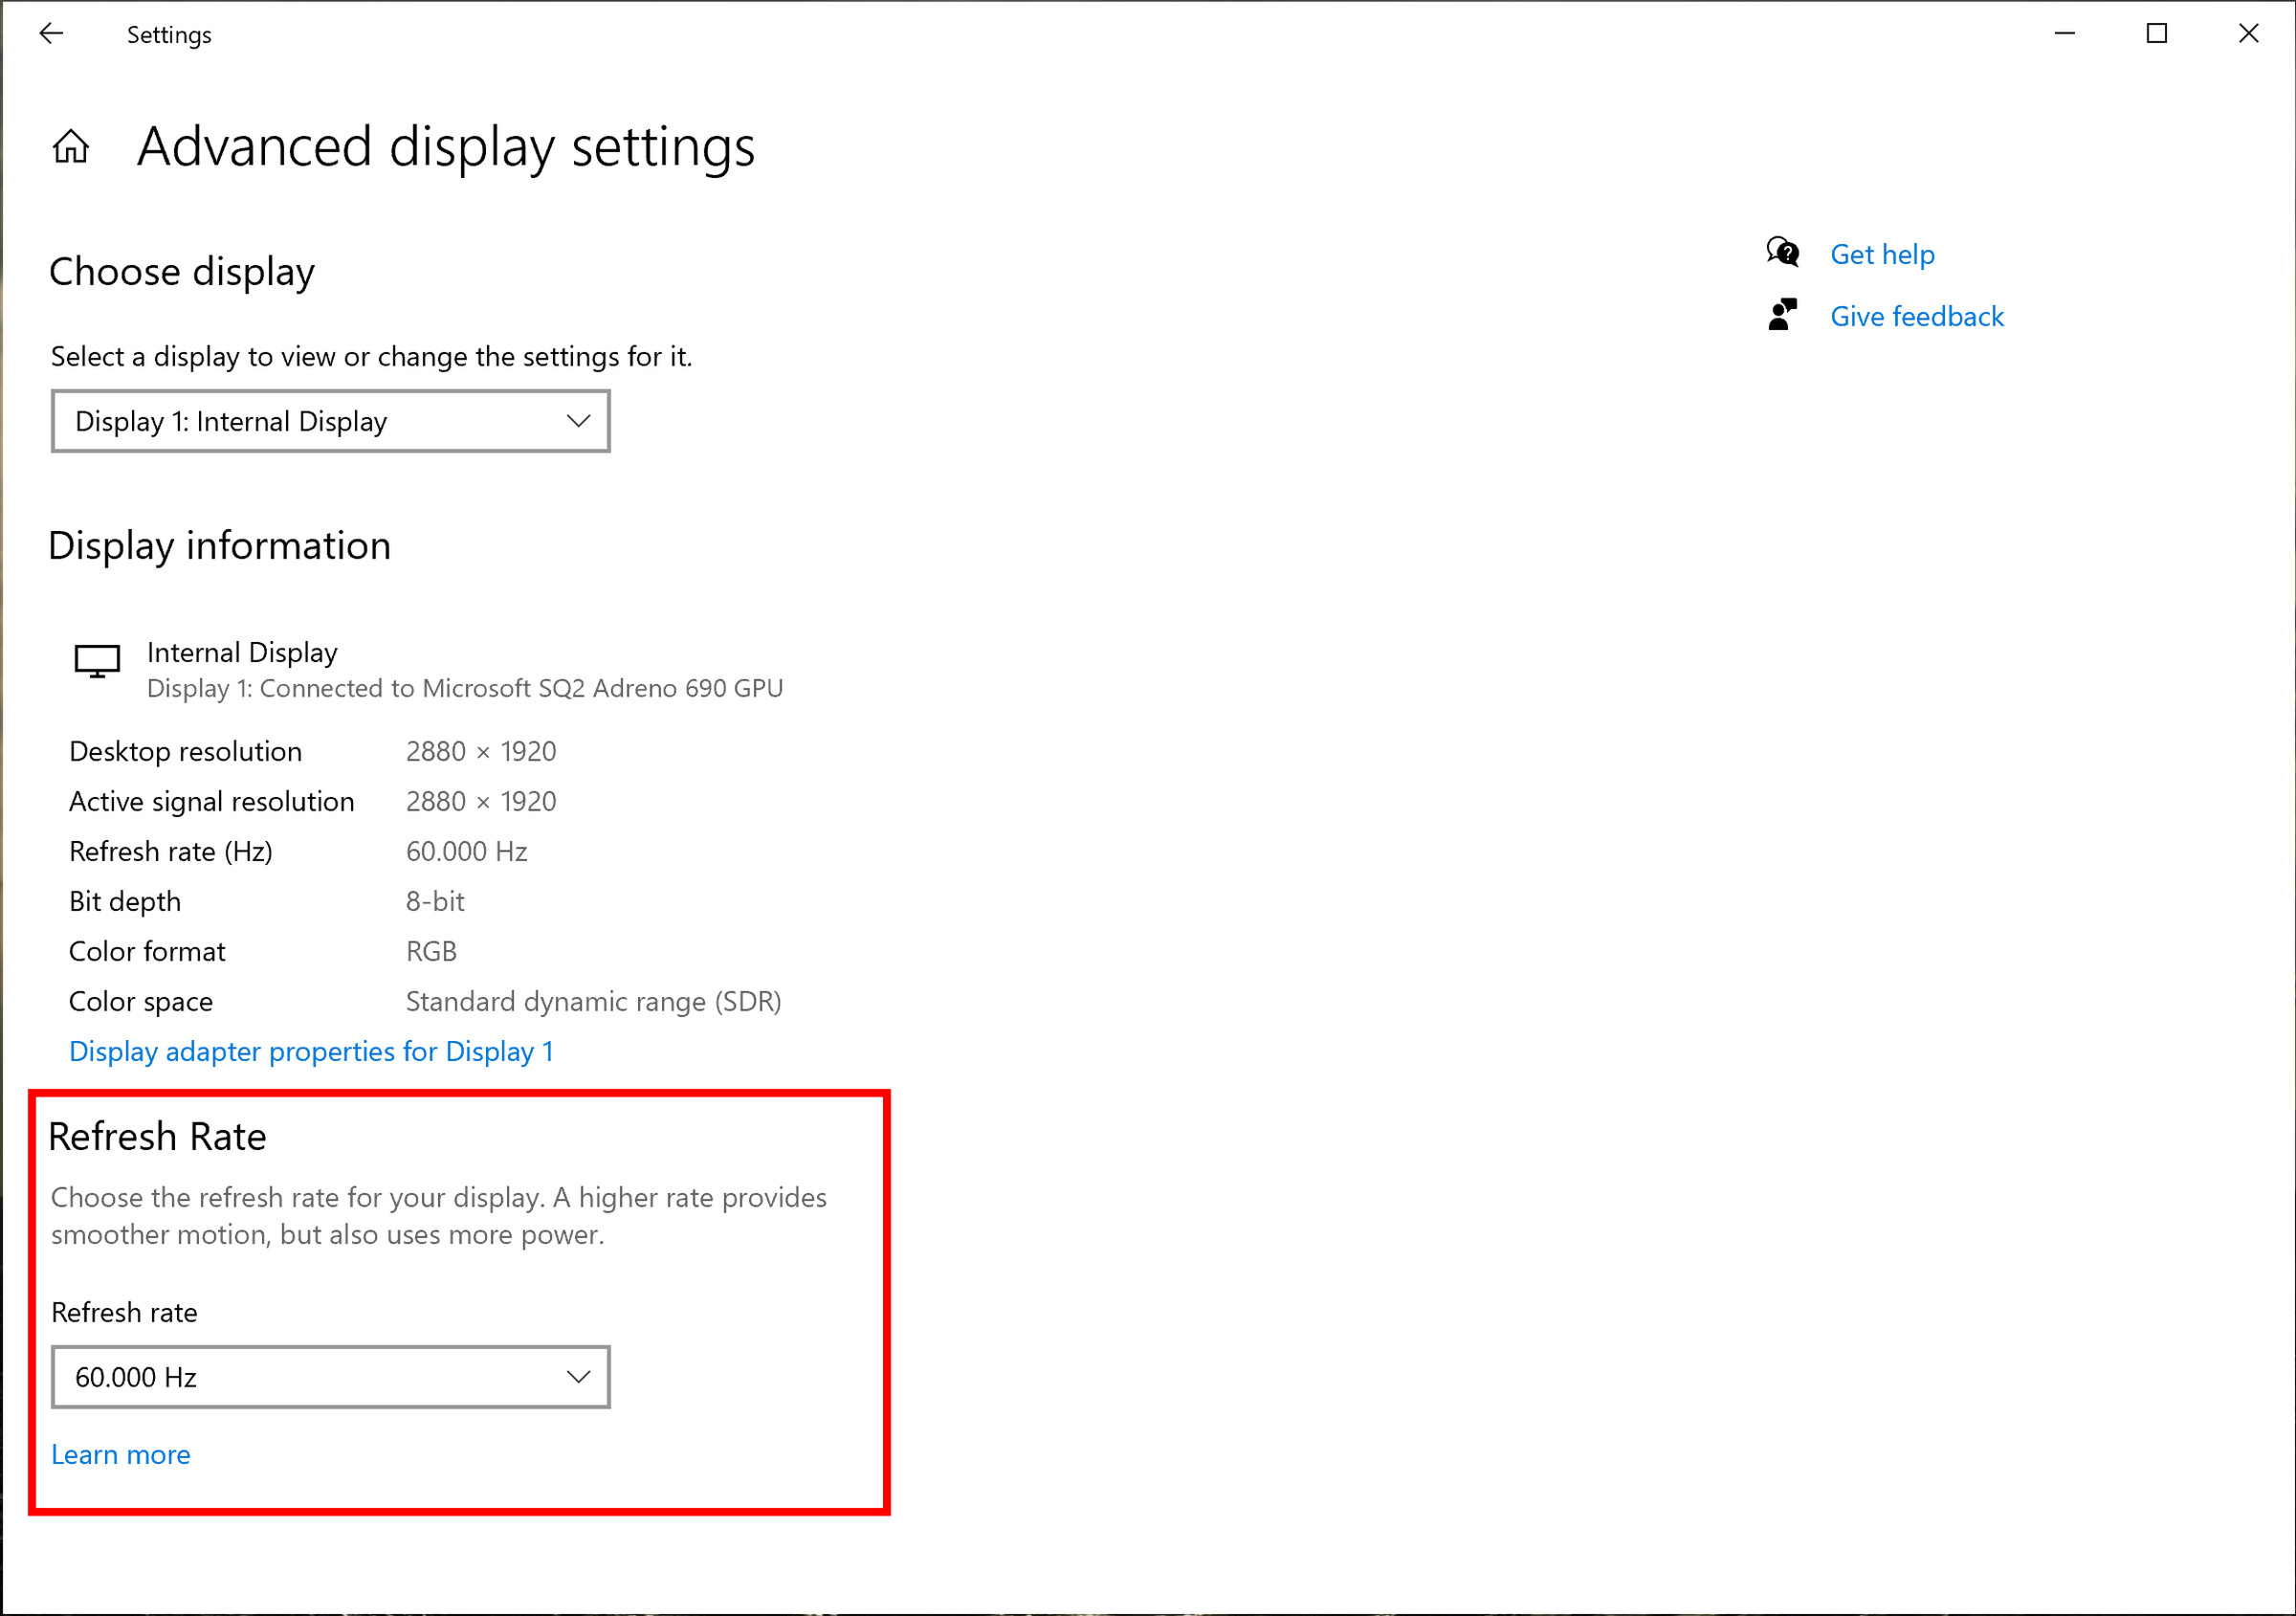 New monitor refresh rate setting.﻿